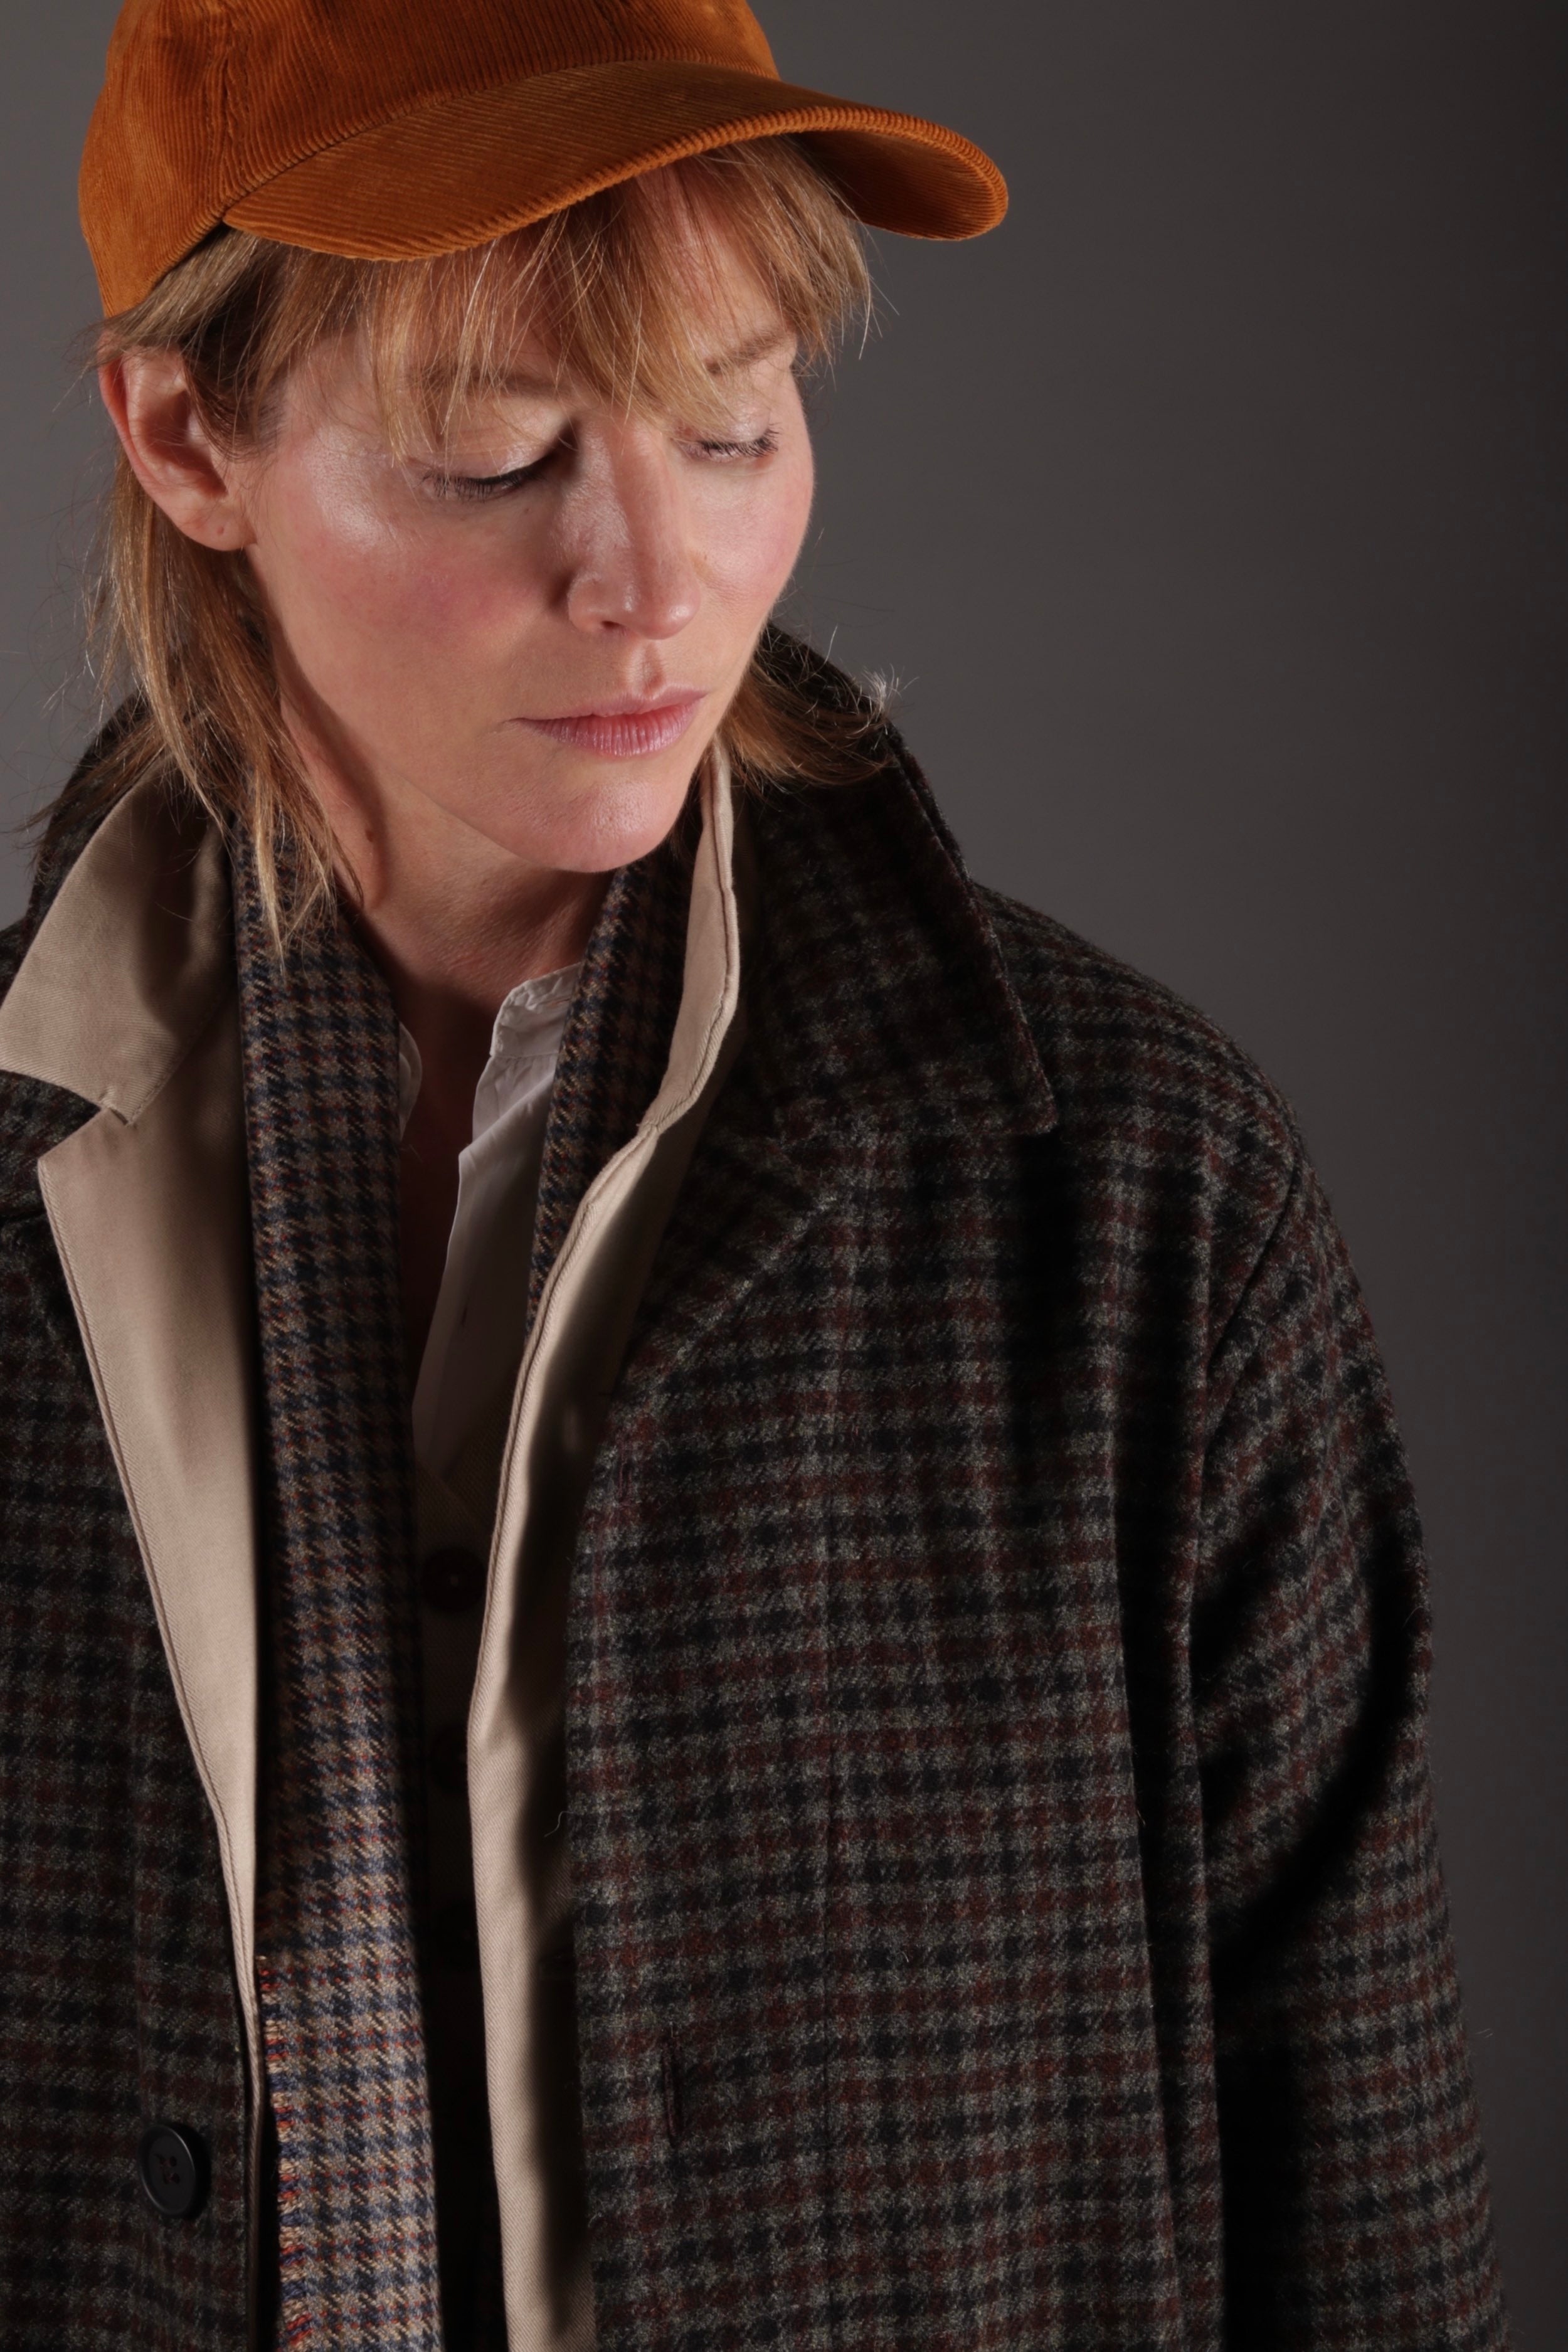 Sienna wears Carrier Company Wool Coat with Corduroy Cap, Scarf, Three Button Jacket and Dutch Trousers